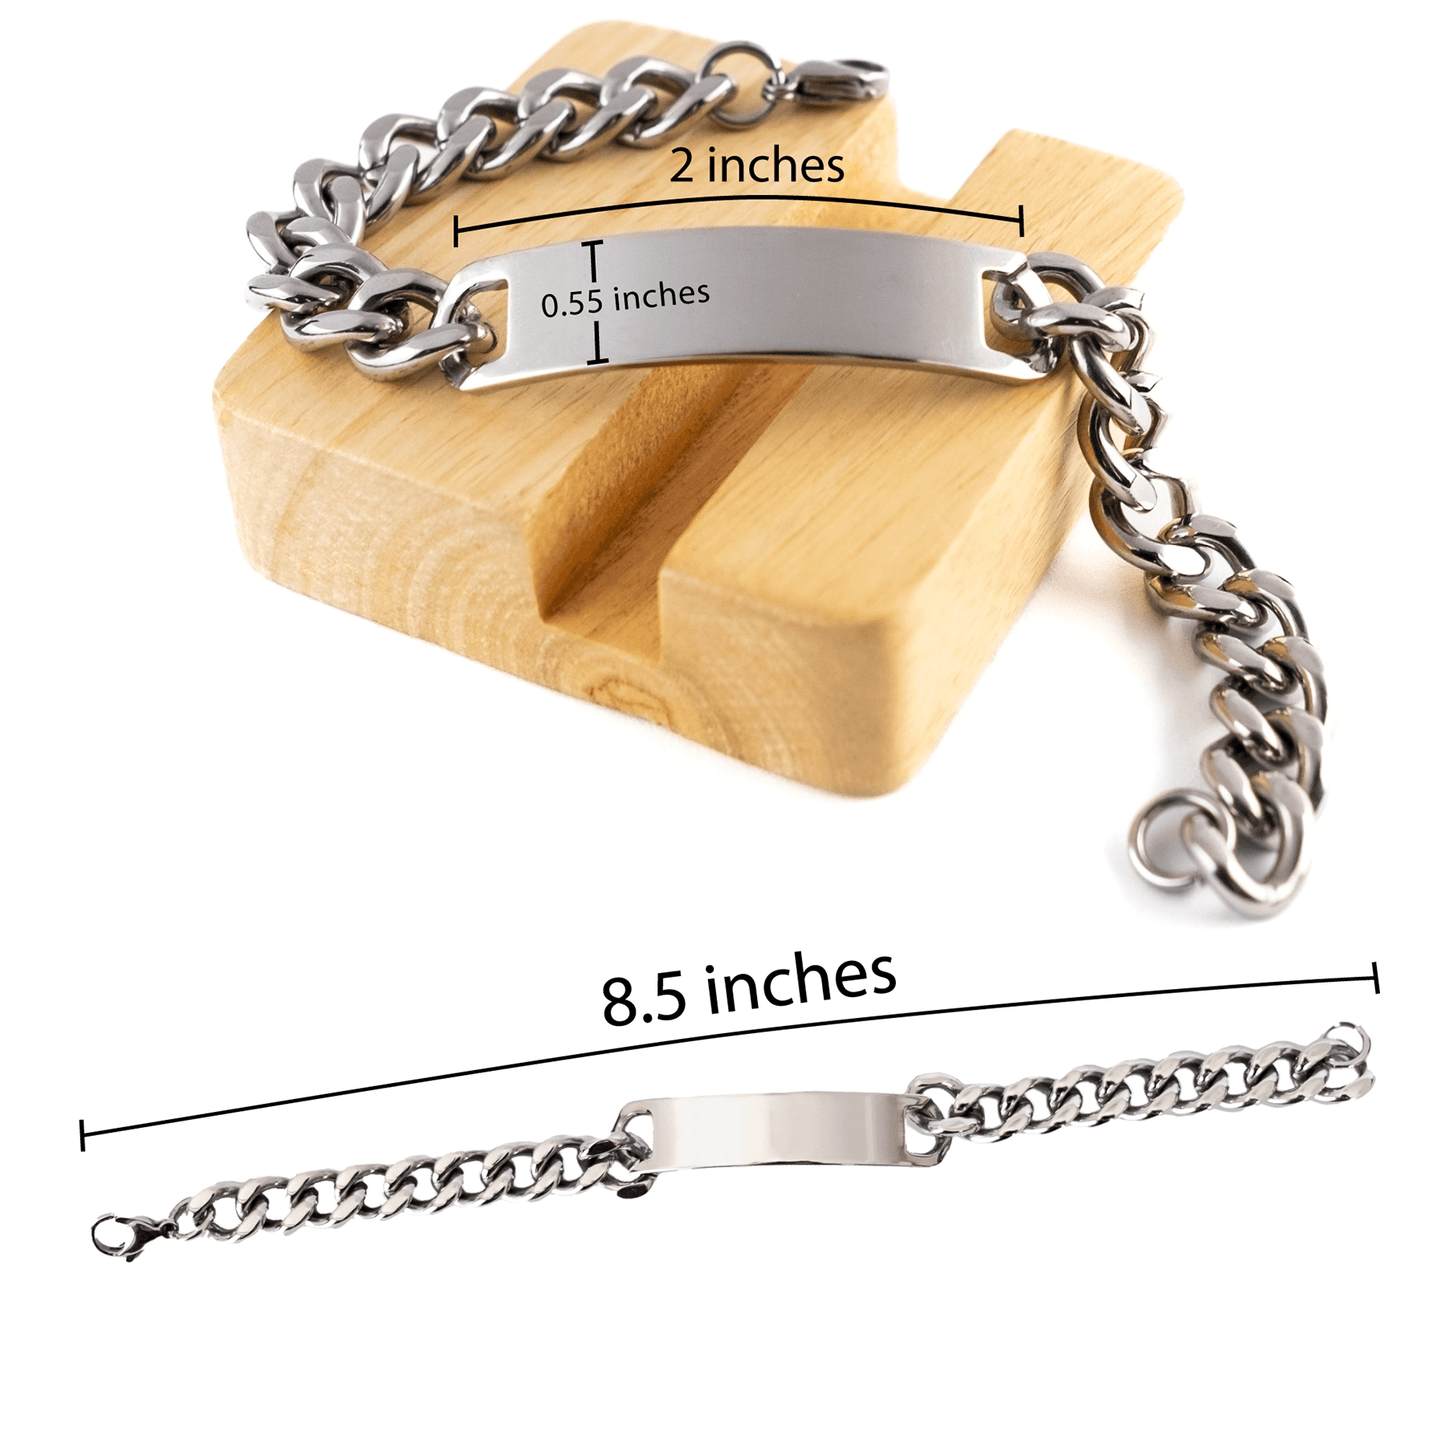 Remarkable Pharmacy Technician Gifts, Your dedication and hard work, Inspirational Birthday Christmas Unique Cuban Chain Stainless Steel Bracelet For Pharmacy Technician, Coworkers, Men, Women, Friends - Mallard Moon Gift Shop